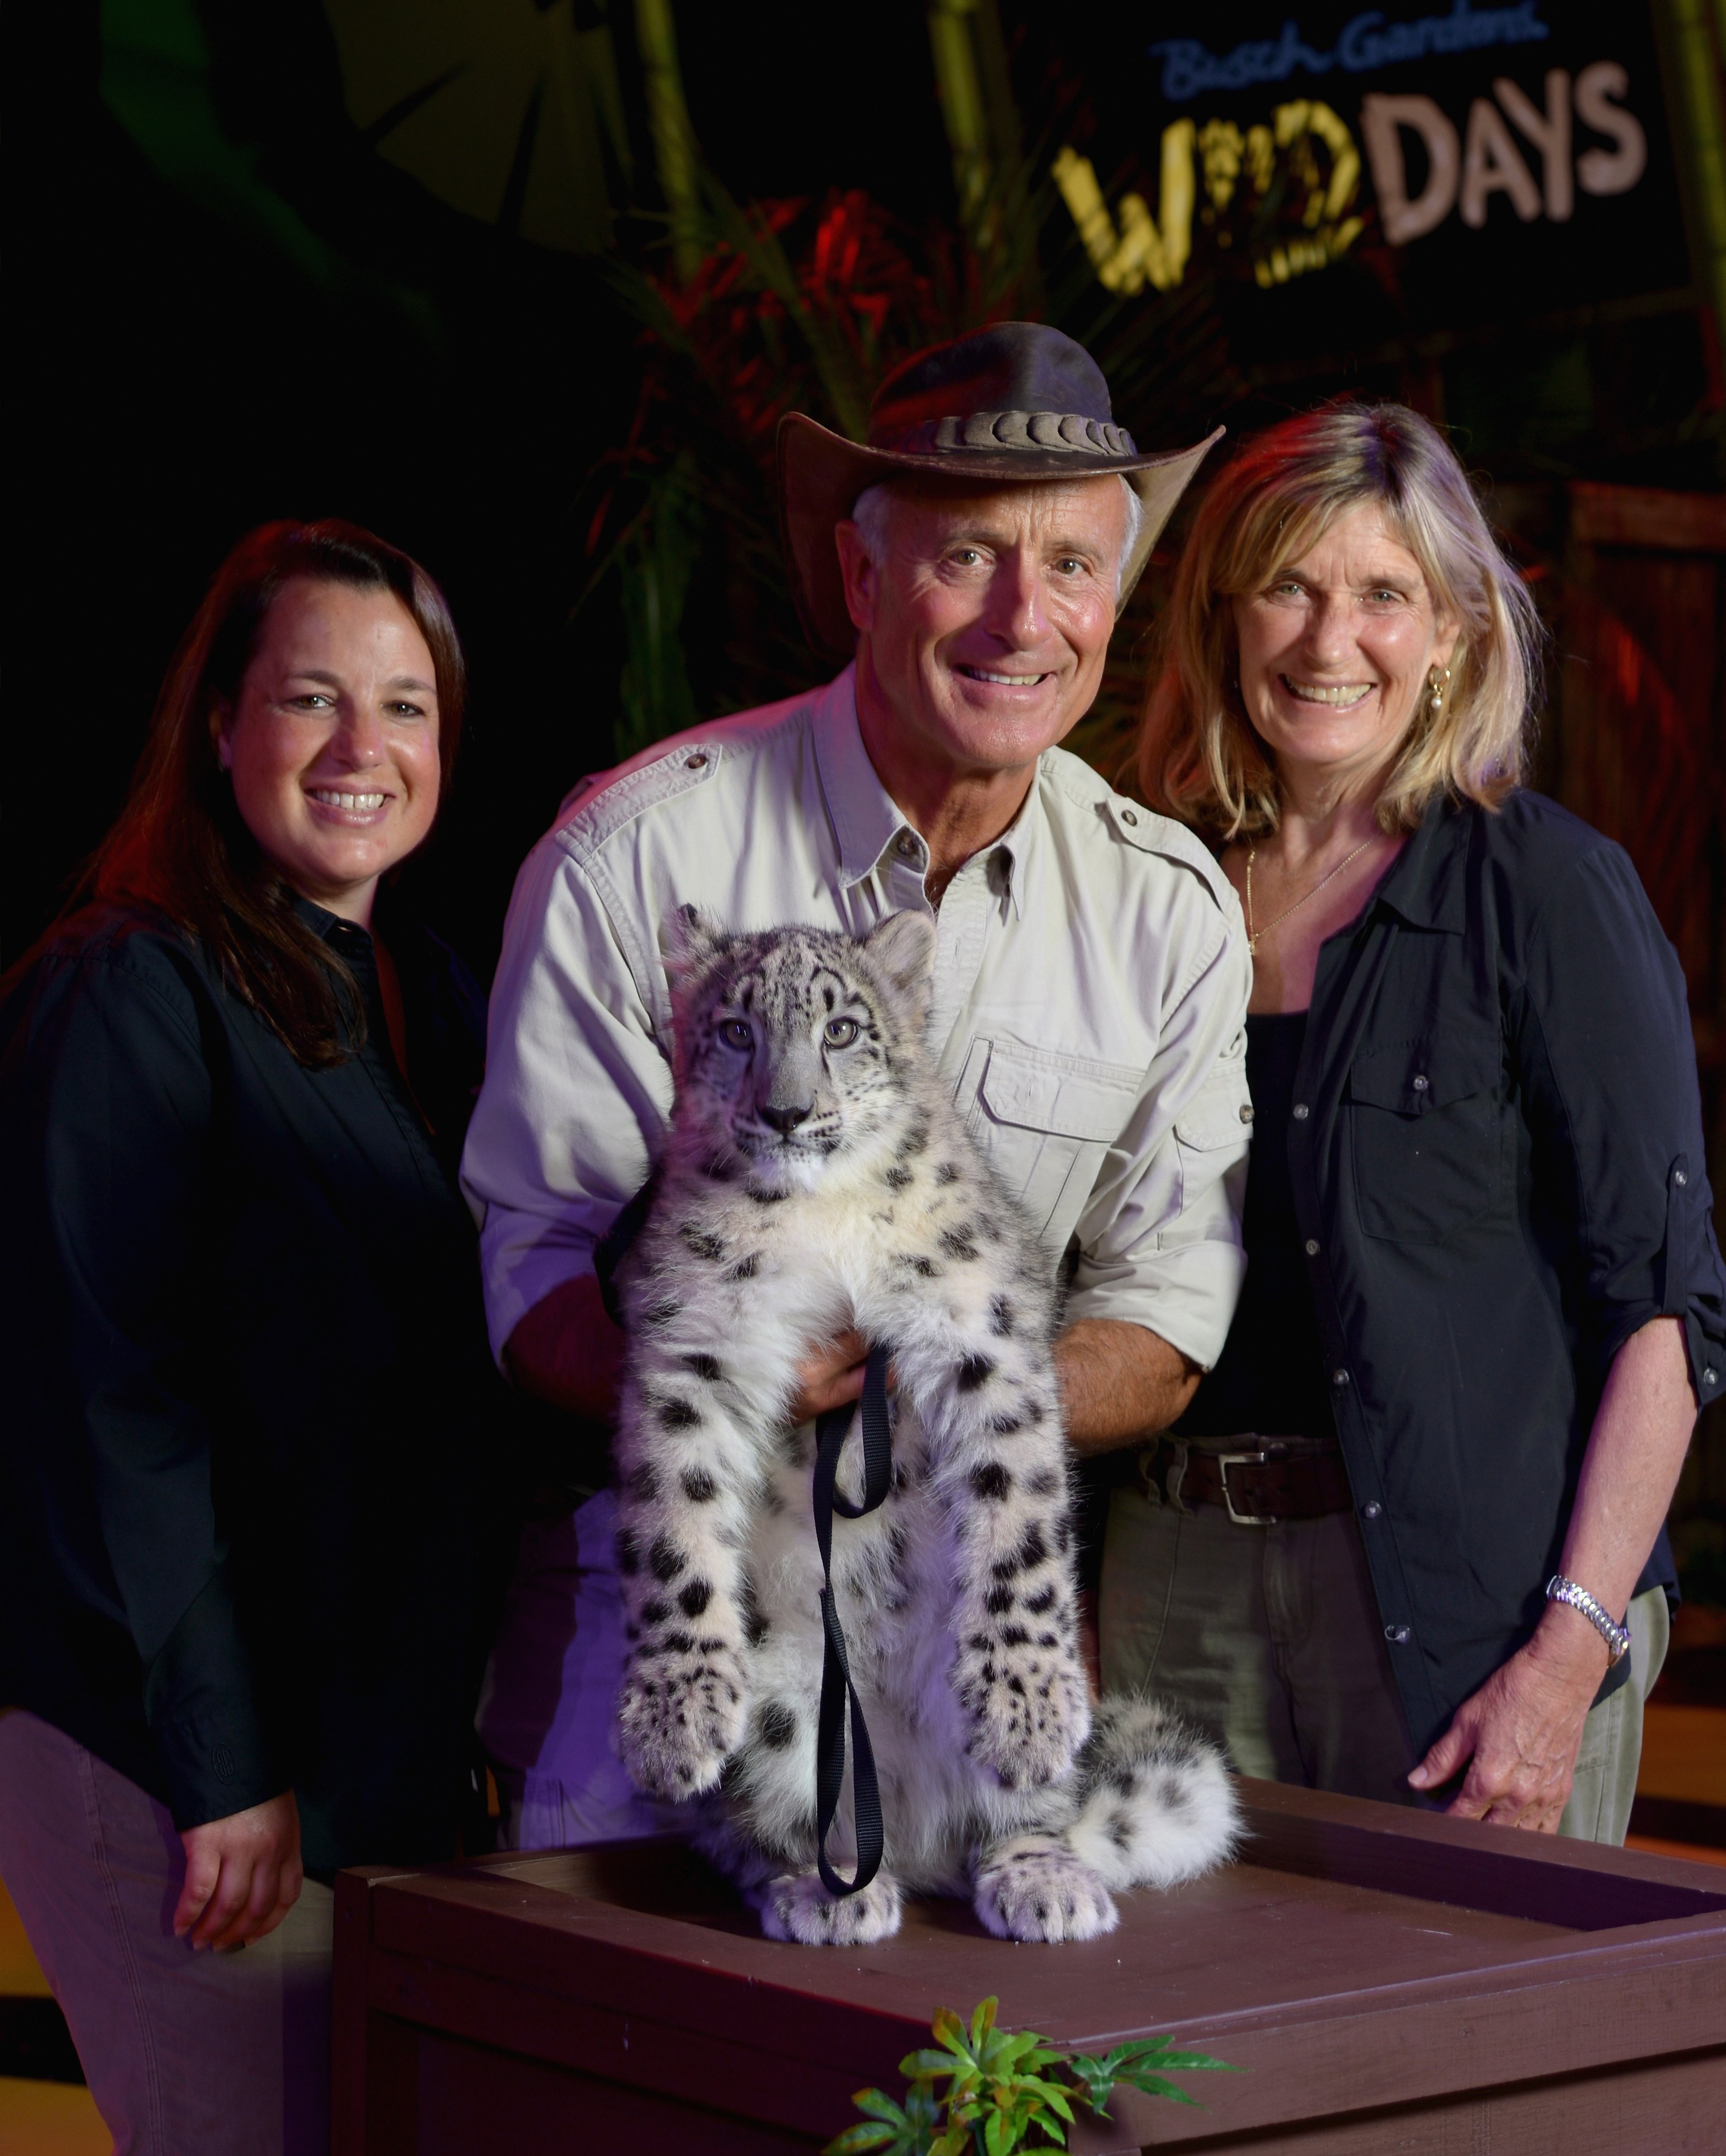 Jungle Jack Hanna standing with his wife and their daughter, Julie, as they pose with an endangered Snow Leopard